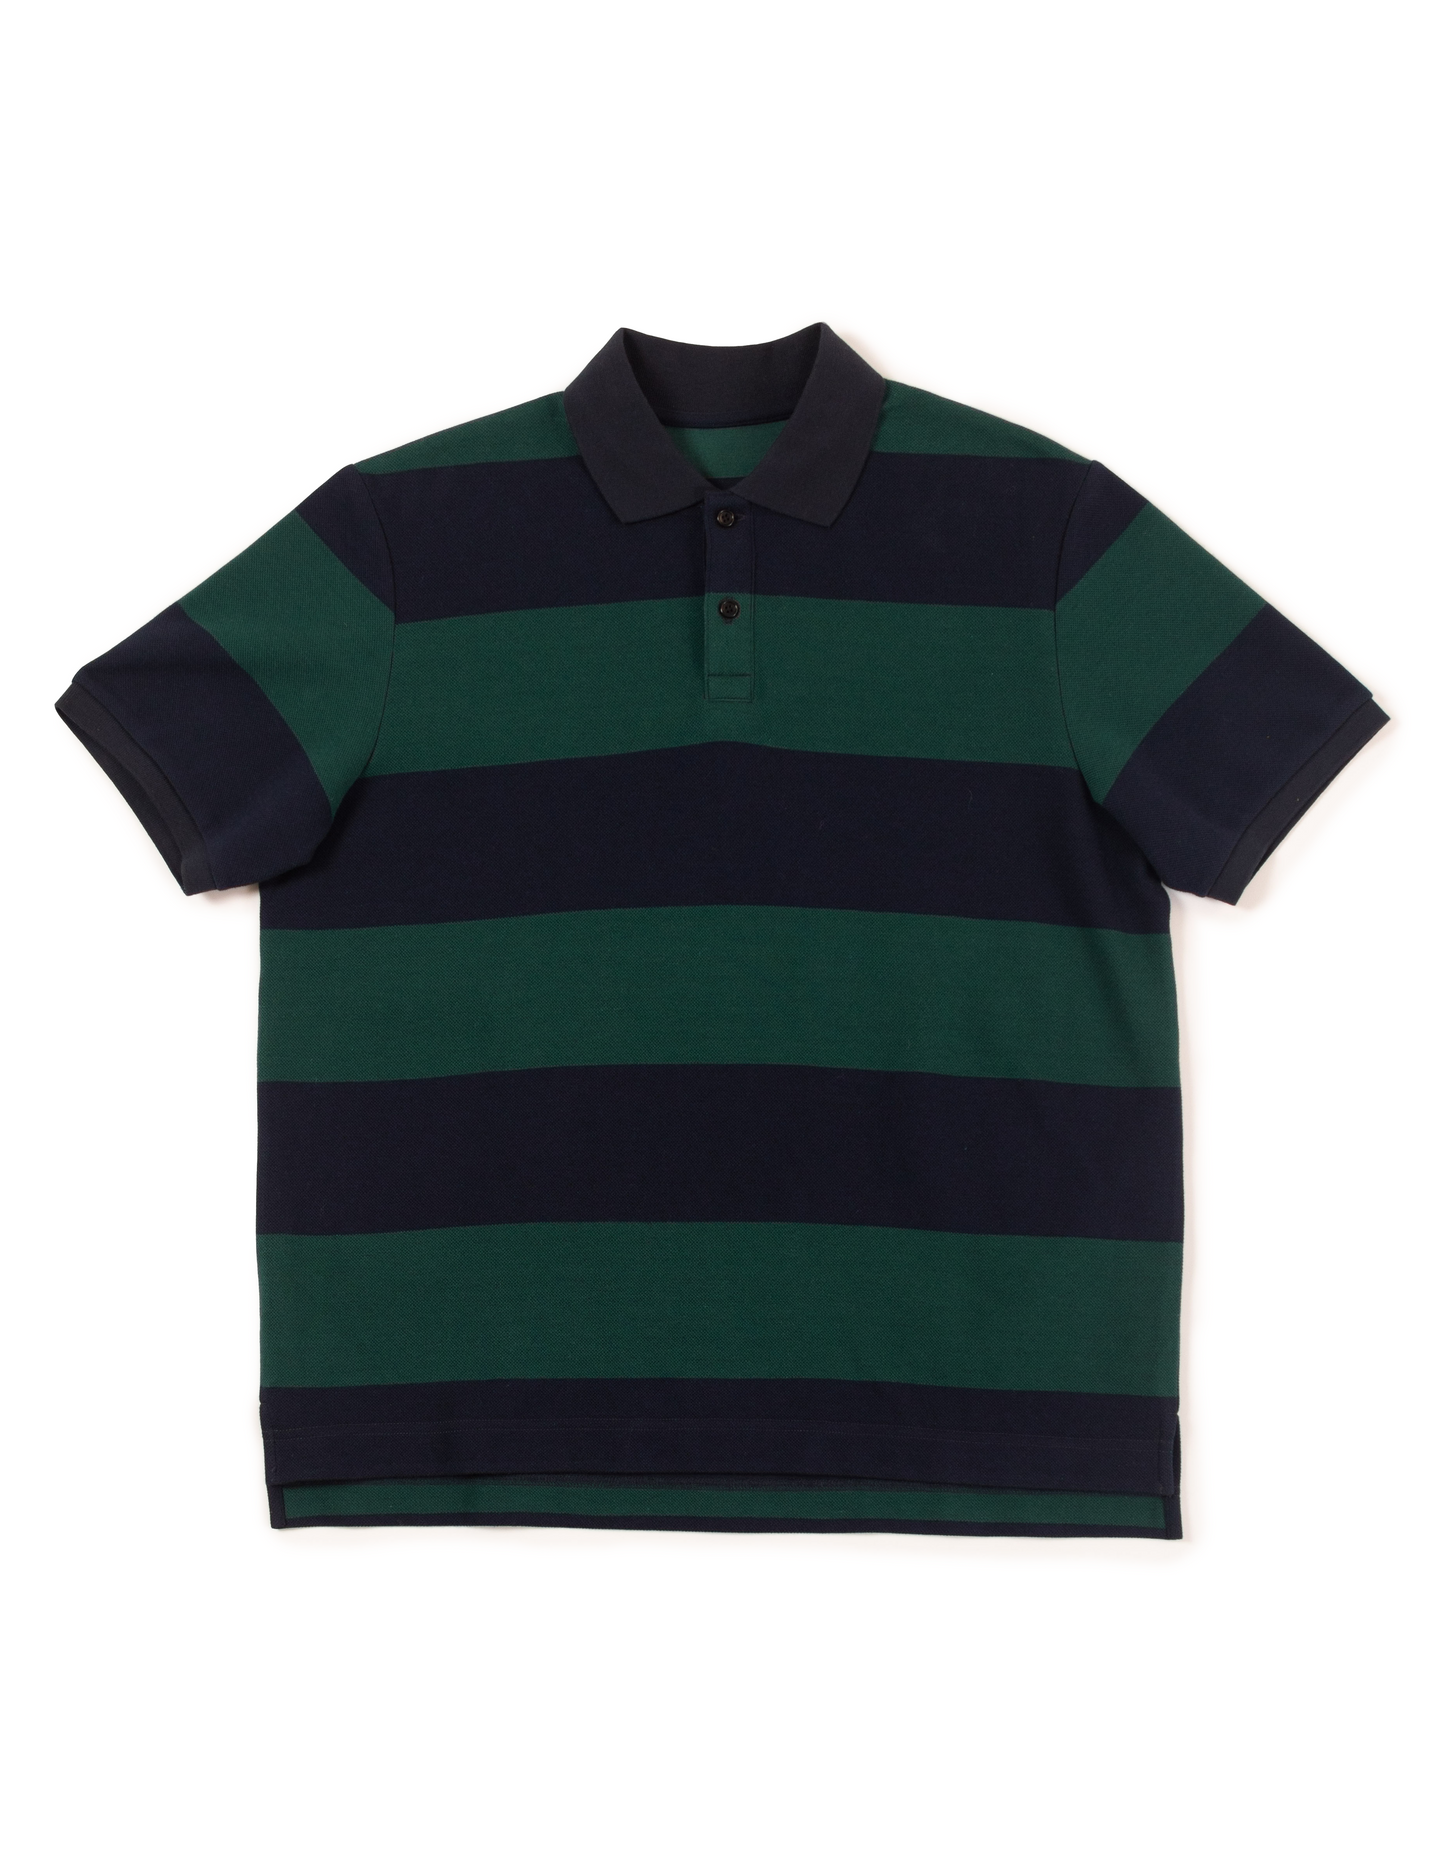 RELAXED FIT WIDE STRIPE POLO - GREEN/NAVY